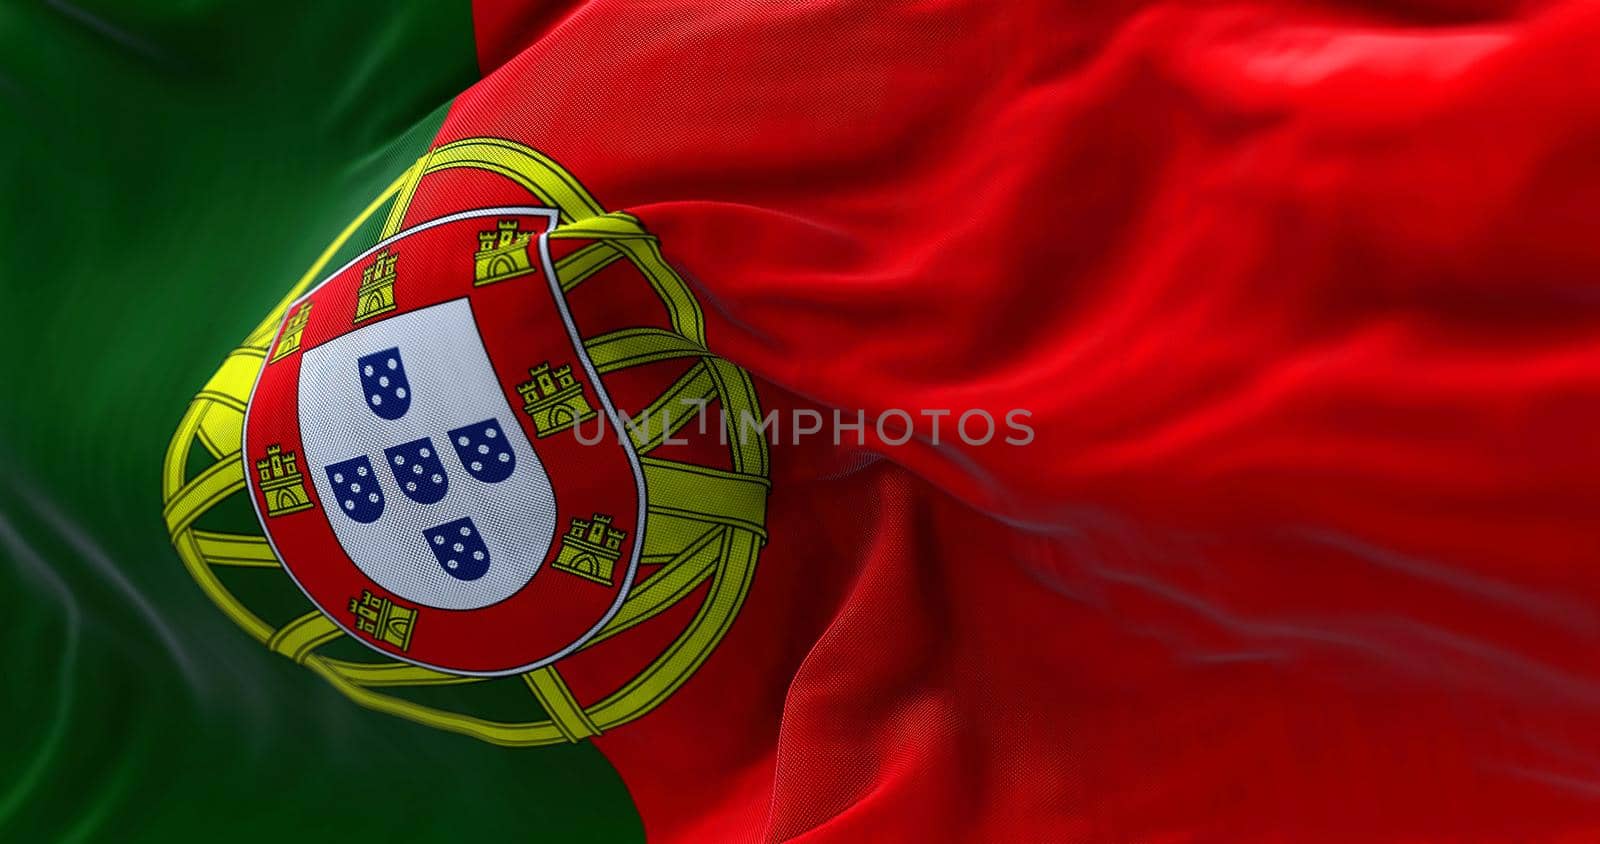 Close-up view of Portugal national flag waving in the wind. Portugal is an European country located in western Europe. Fabric background